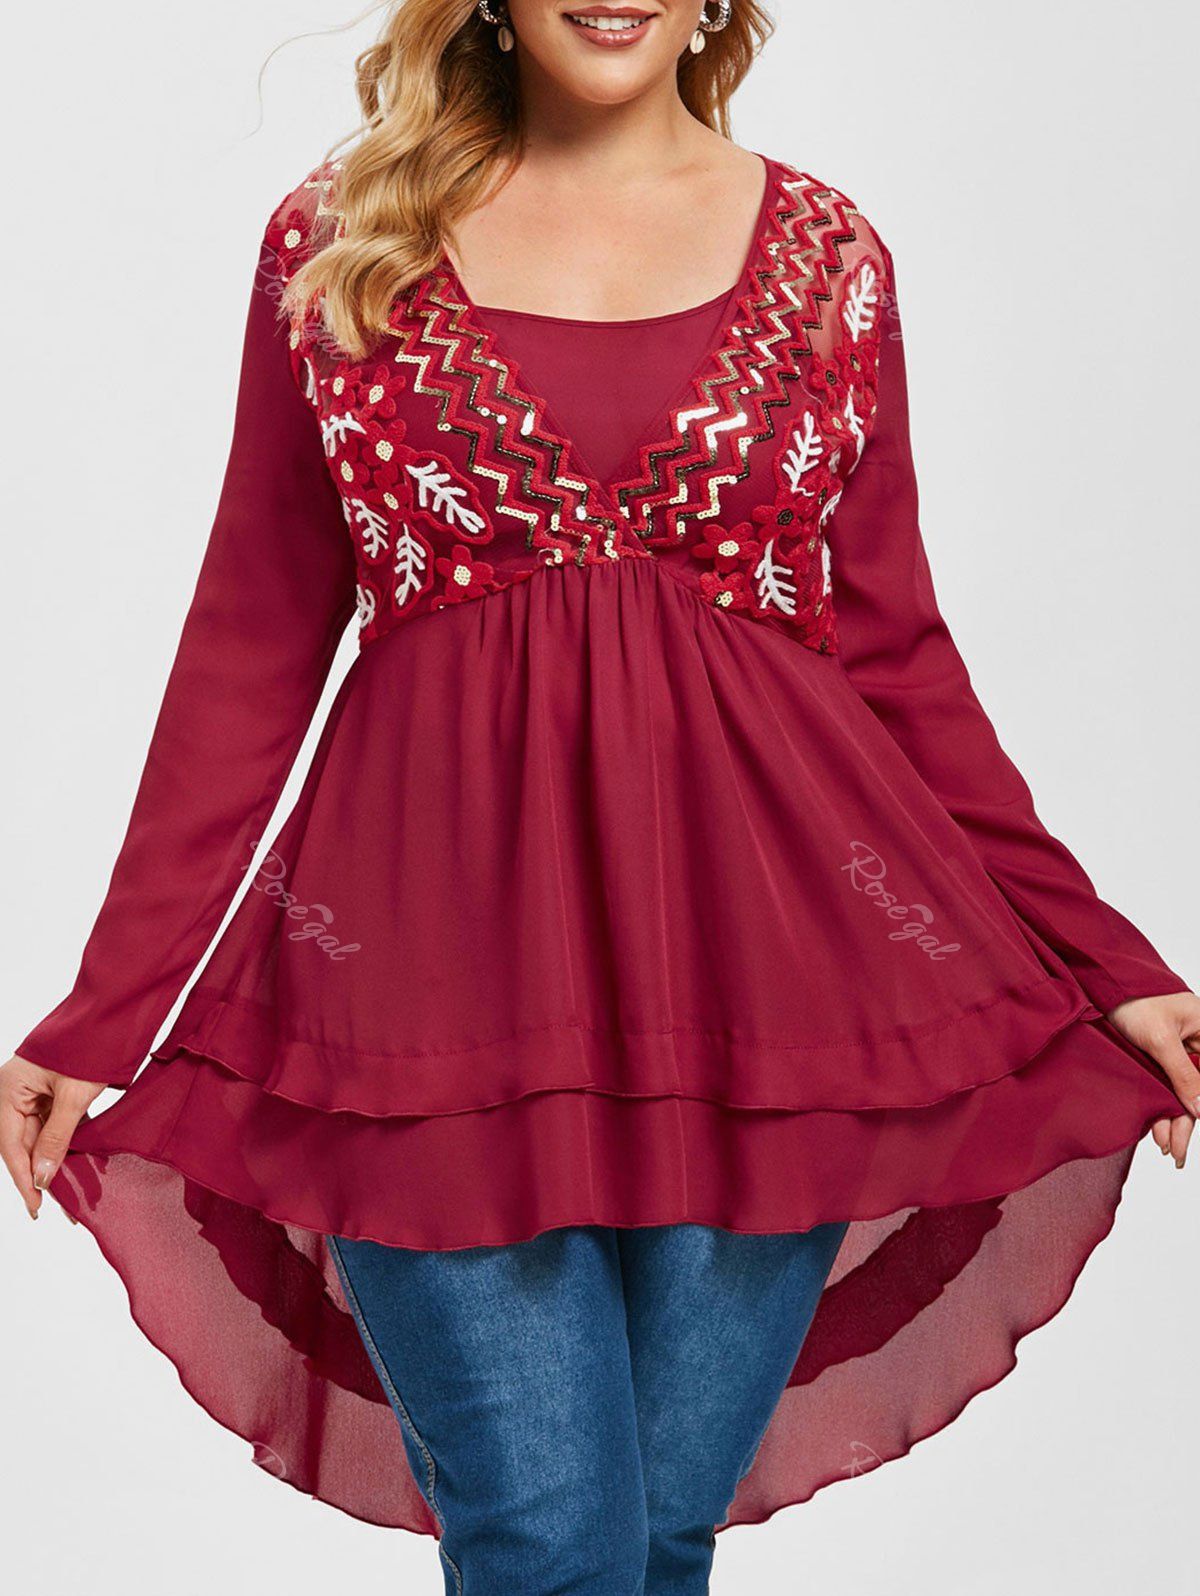 Fashion Plus Size Embroidered Mesh Sequins High Low Surplice Top  